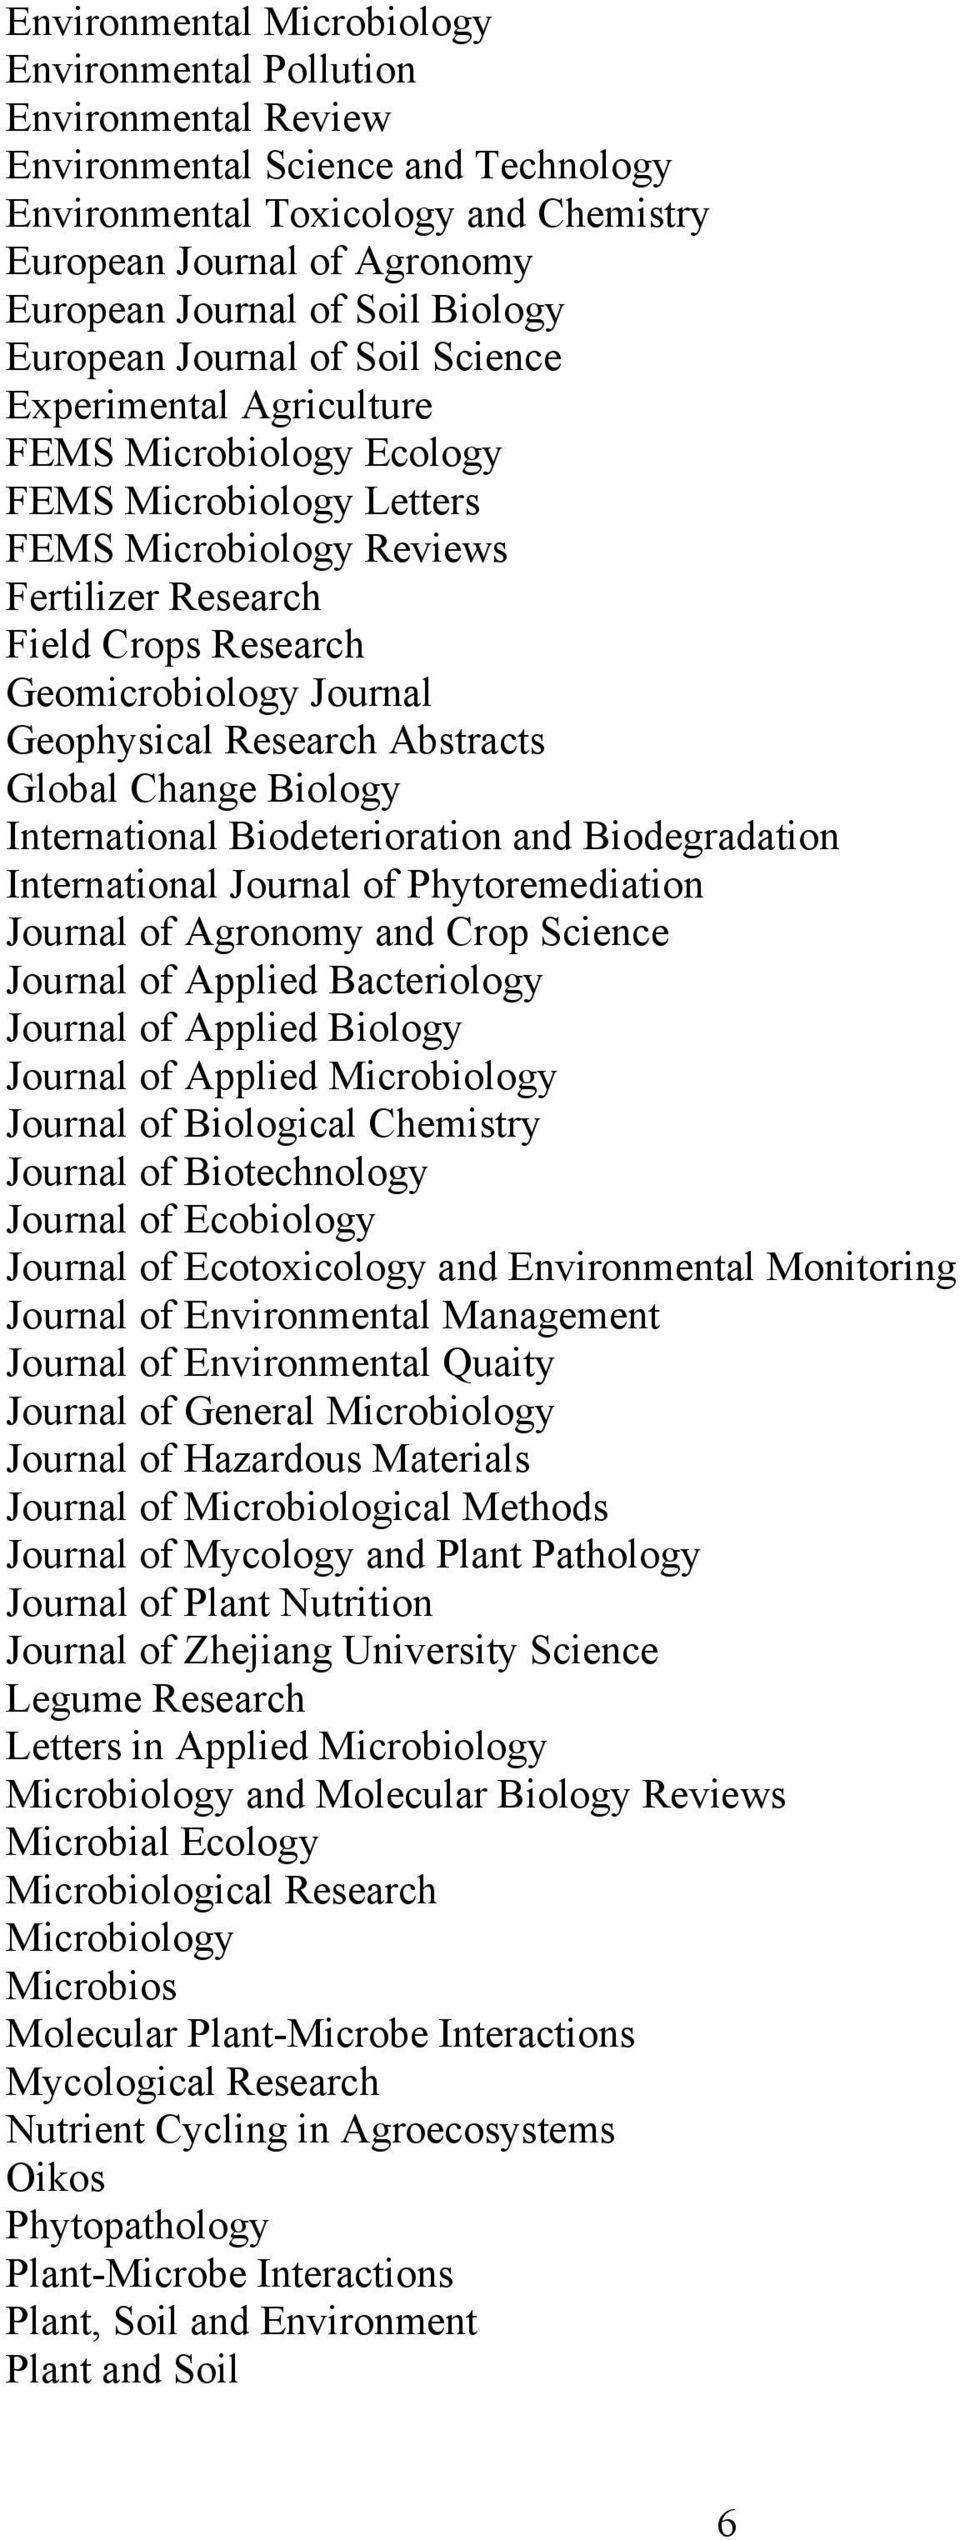 Geomicrobiology Journal Geophysical Research Abstracts Global Change Biology International Biodeterioration and Biodegradation International Journal of Phytoremediation Journal of Agronomy and Crop